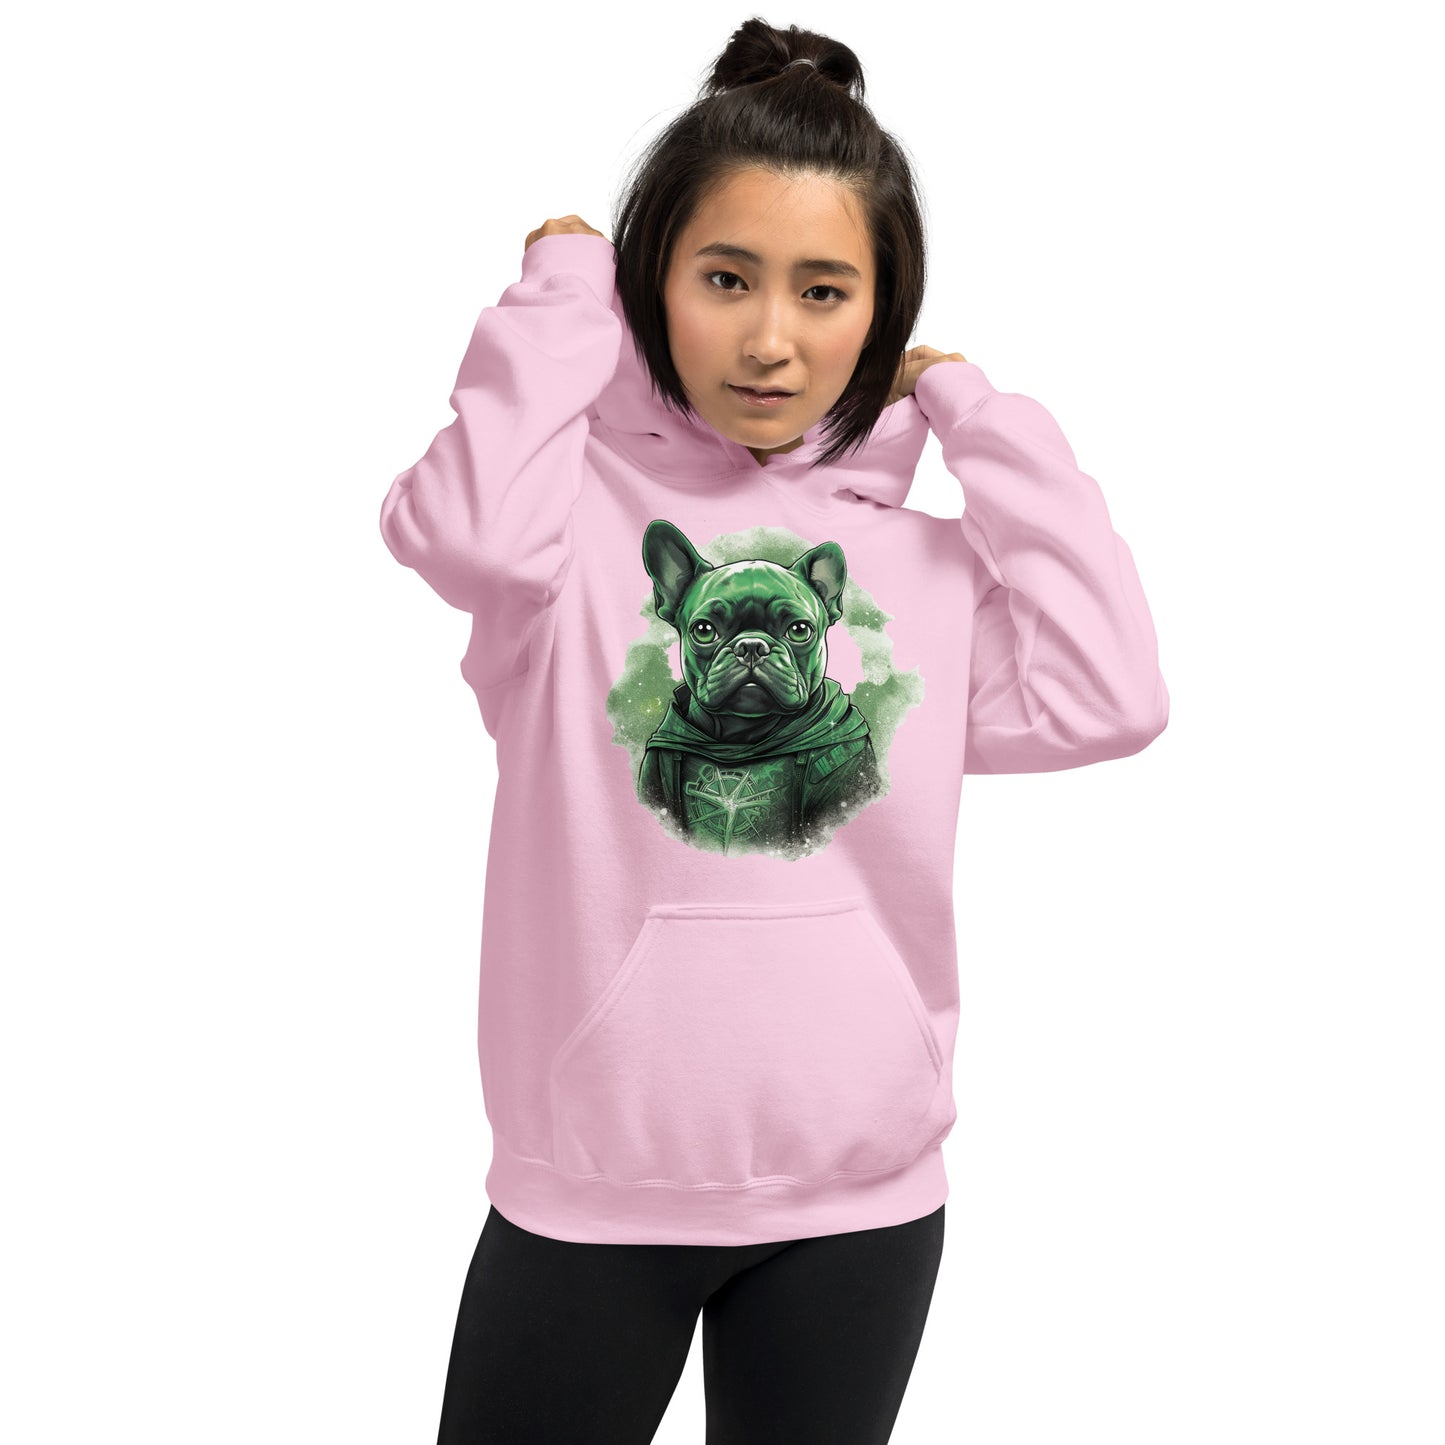 Frenchie Devotion Unisex Hoodie - Comfy & Trendsetting Apparel for Dog Fans